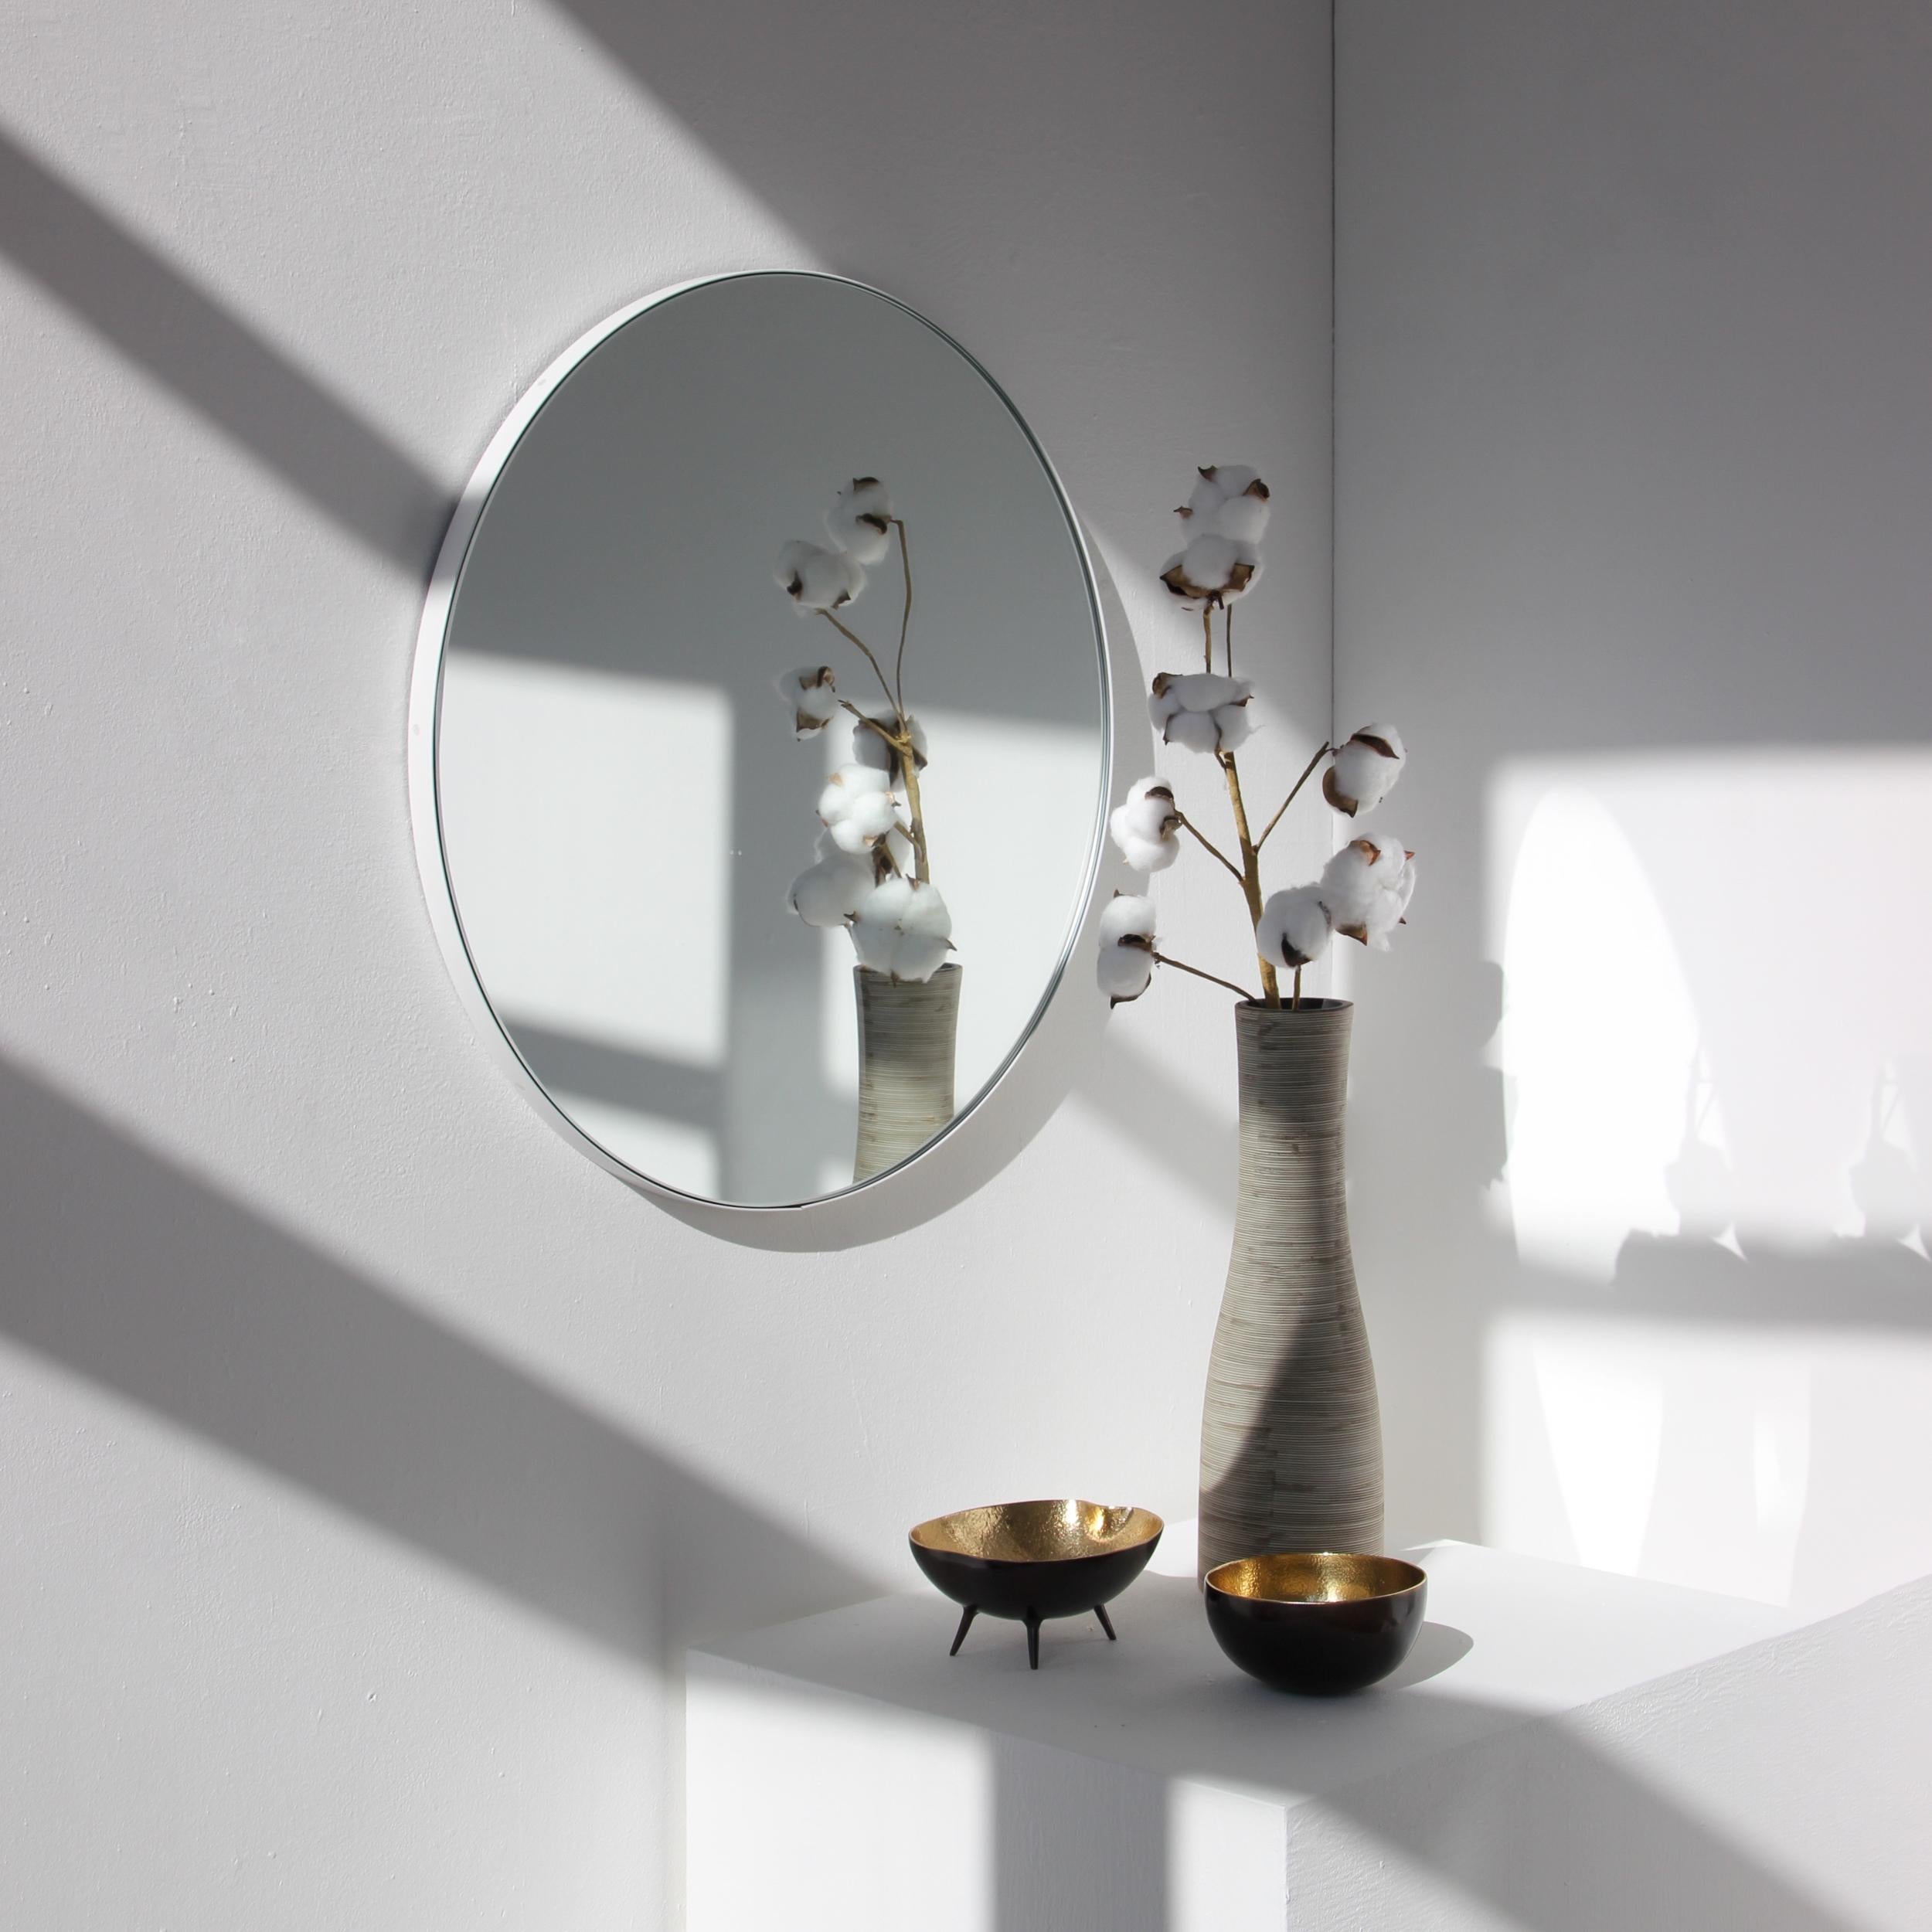 Minimalist round mirror with a smart white powder coated aluminium frame. Designed and handcrafted in London, UK.

Medium, large and extra-large mirrors (60, 80 and 100cm) are fitted with an ingenious French cleat (split batten) system so they may